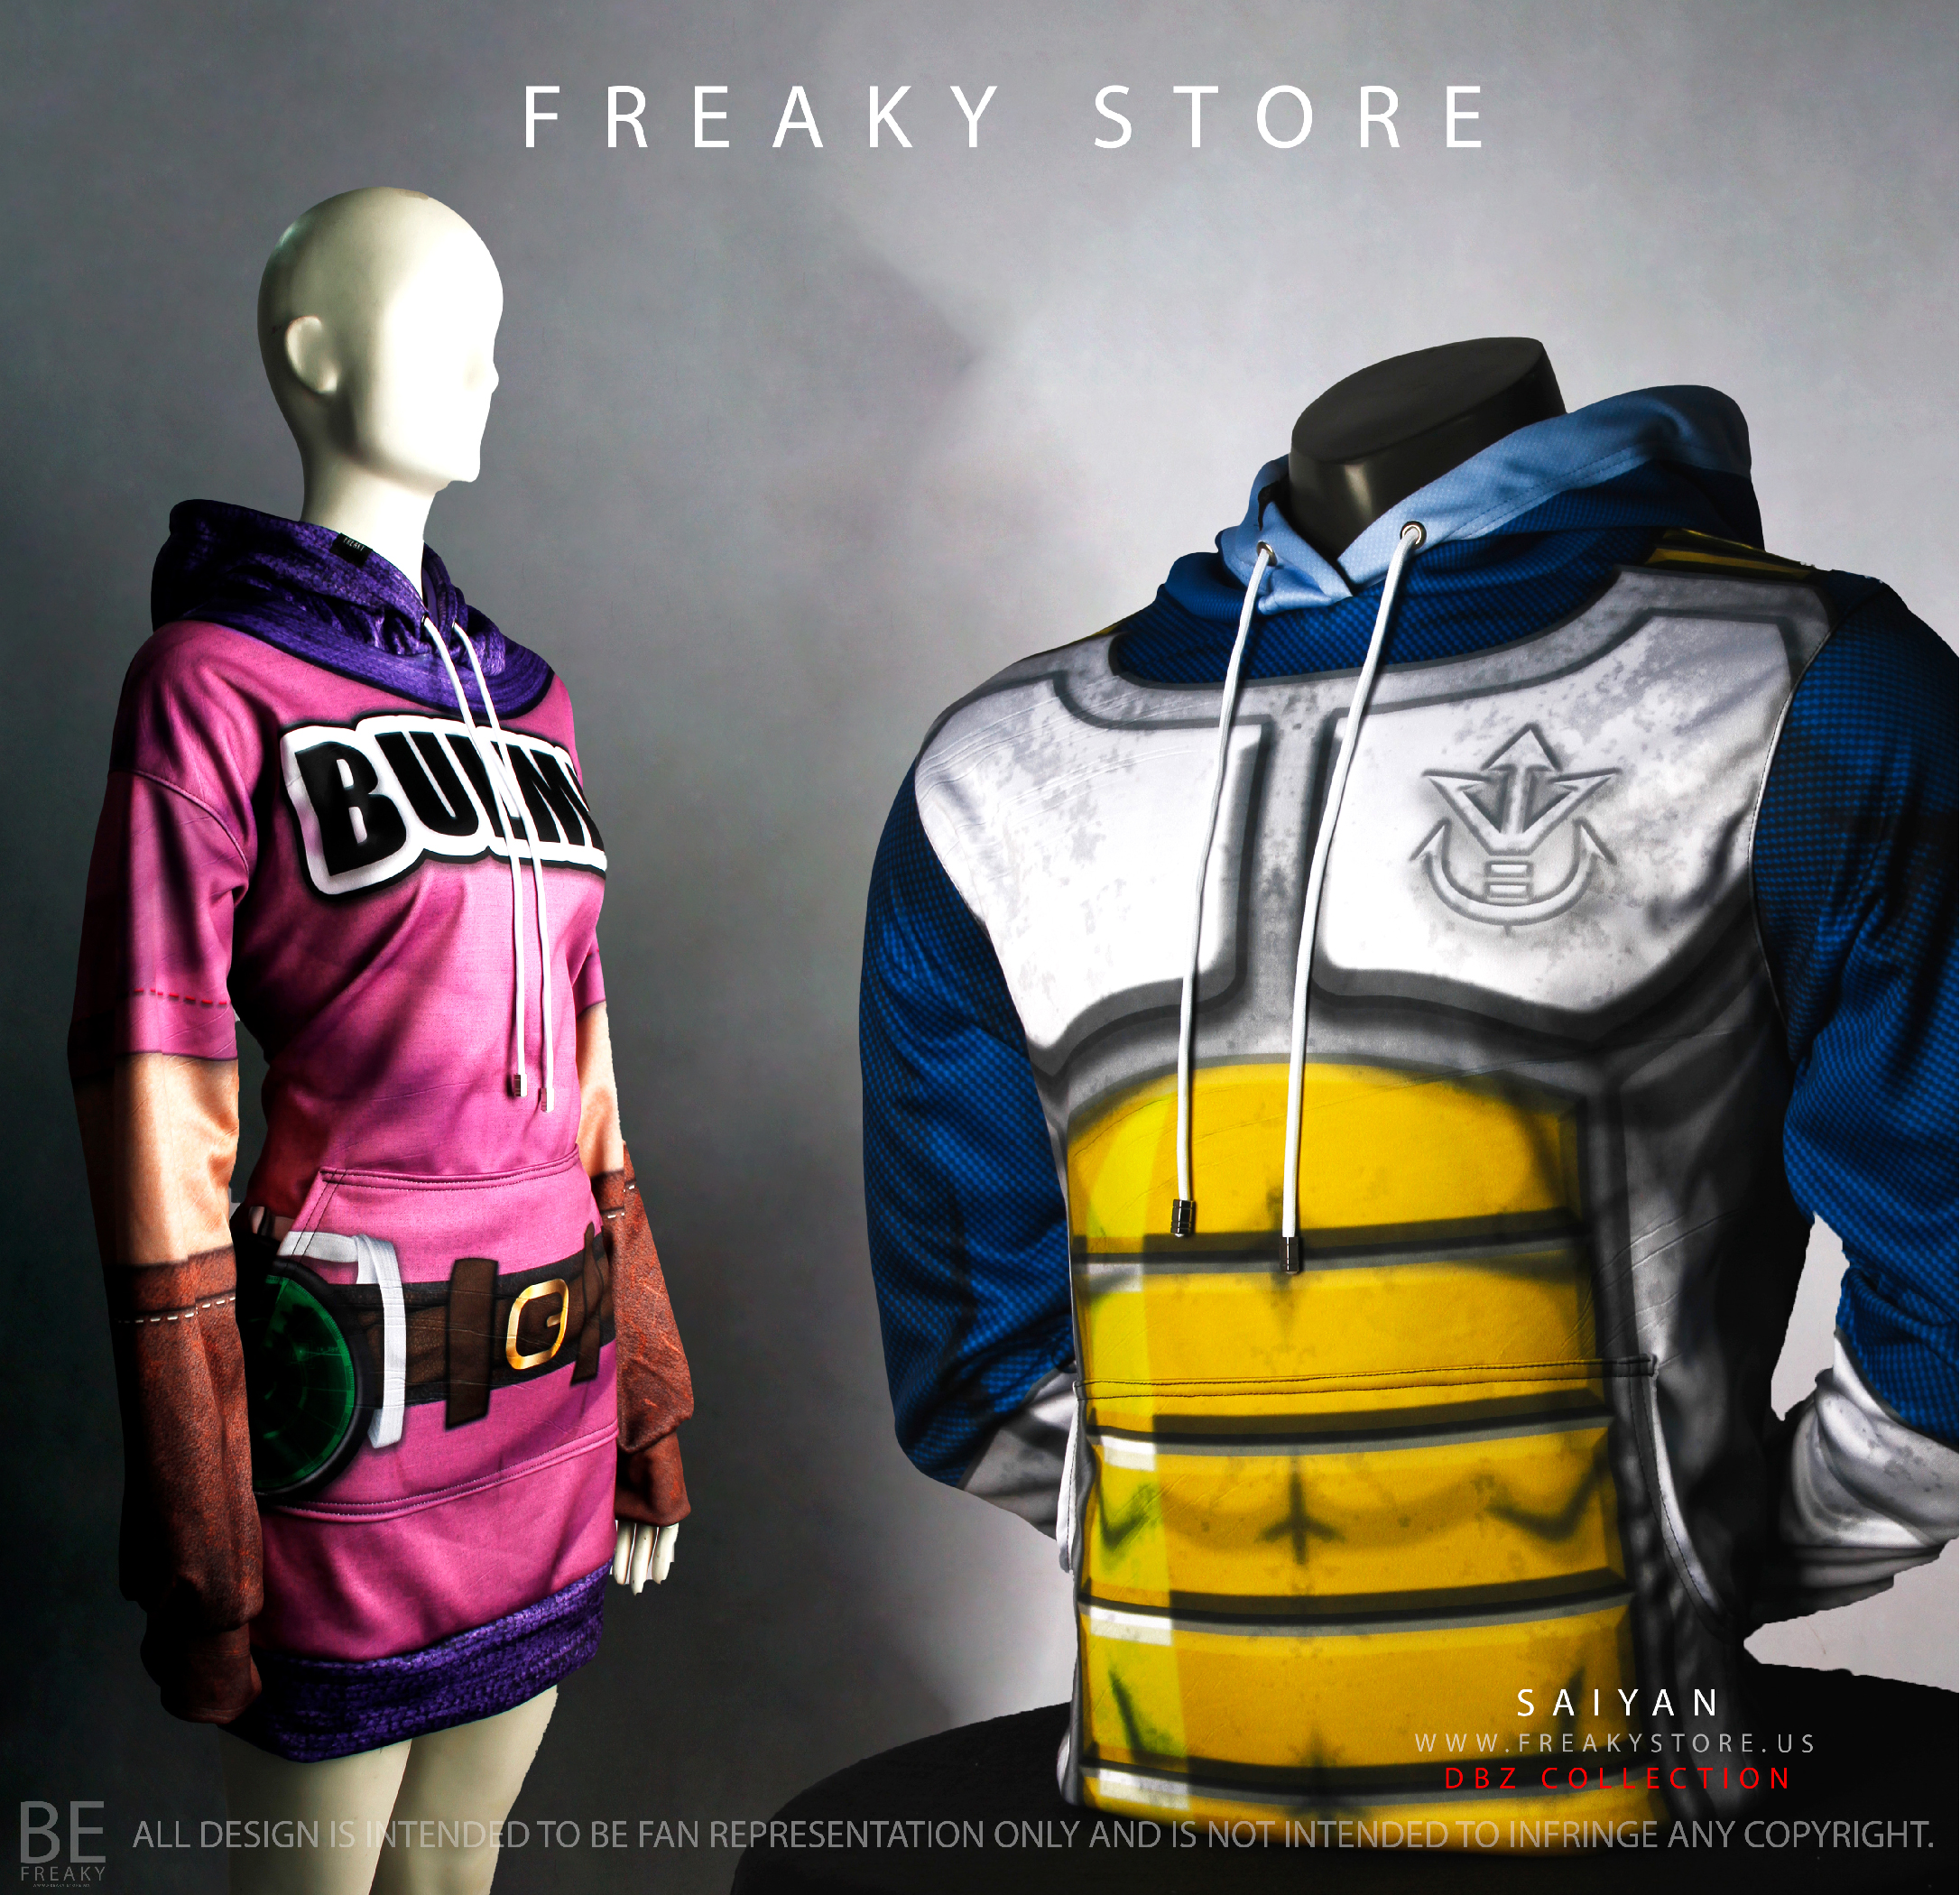 Dr. Luffy – freaky store us